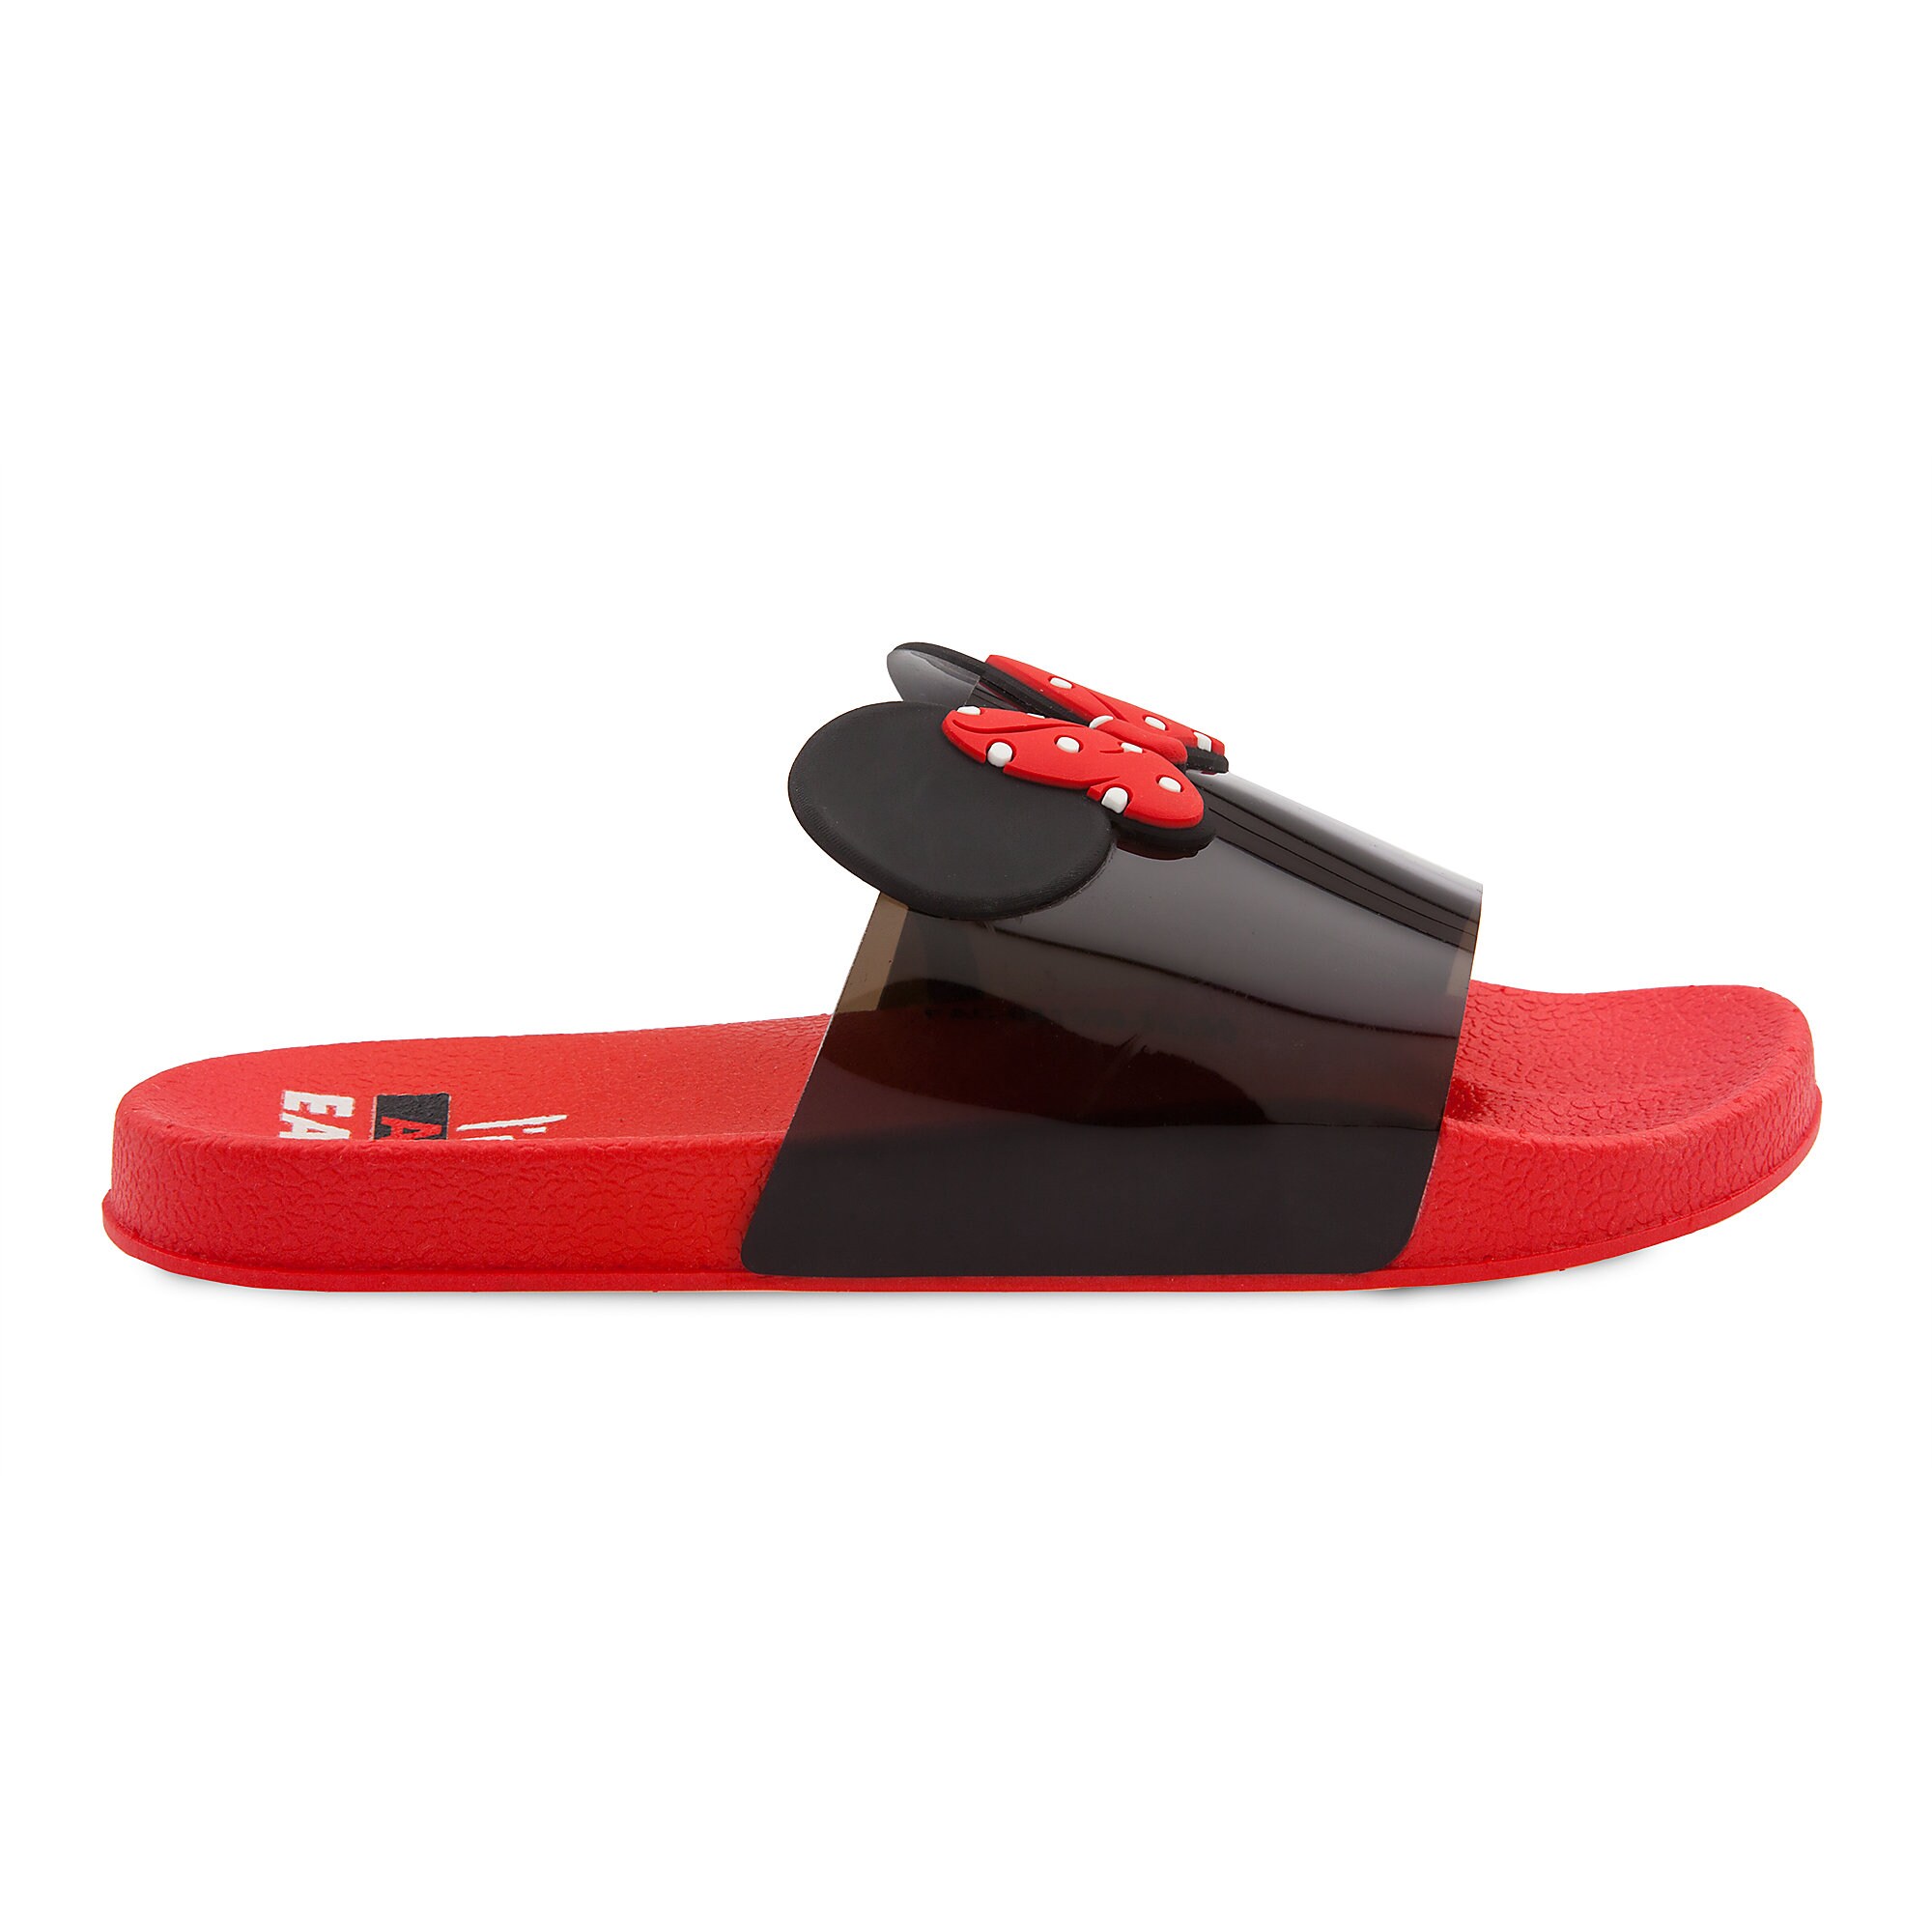 Minnie Mouse Slides for Kids - Red